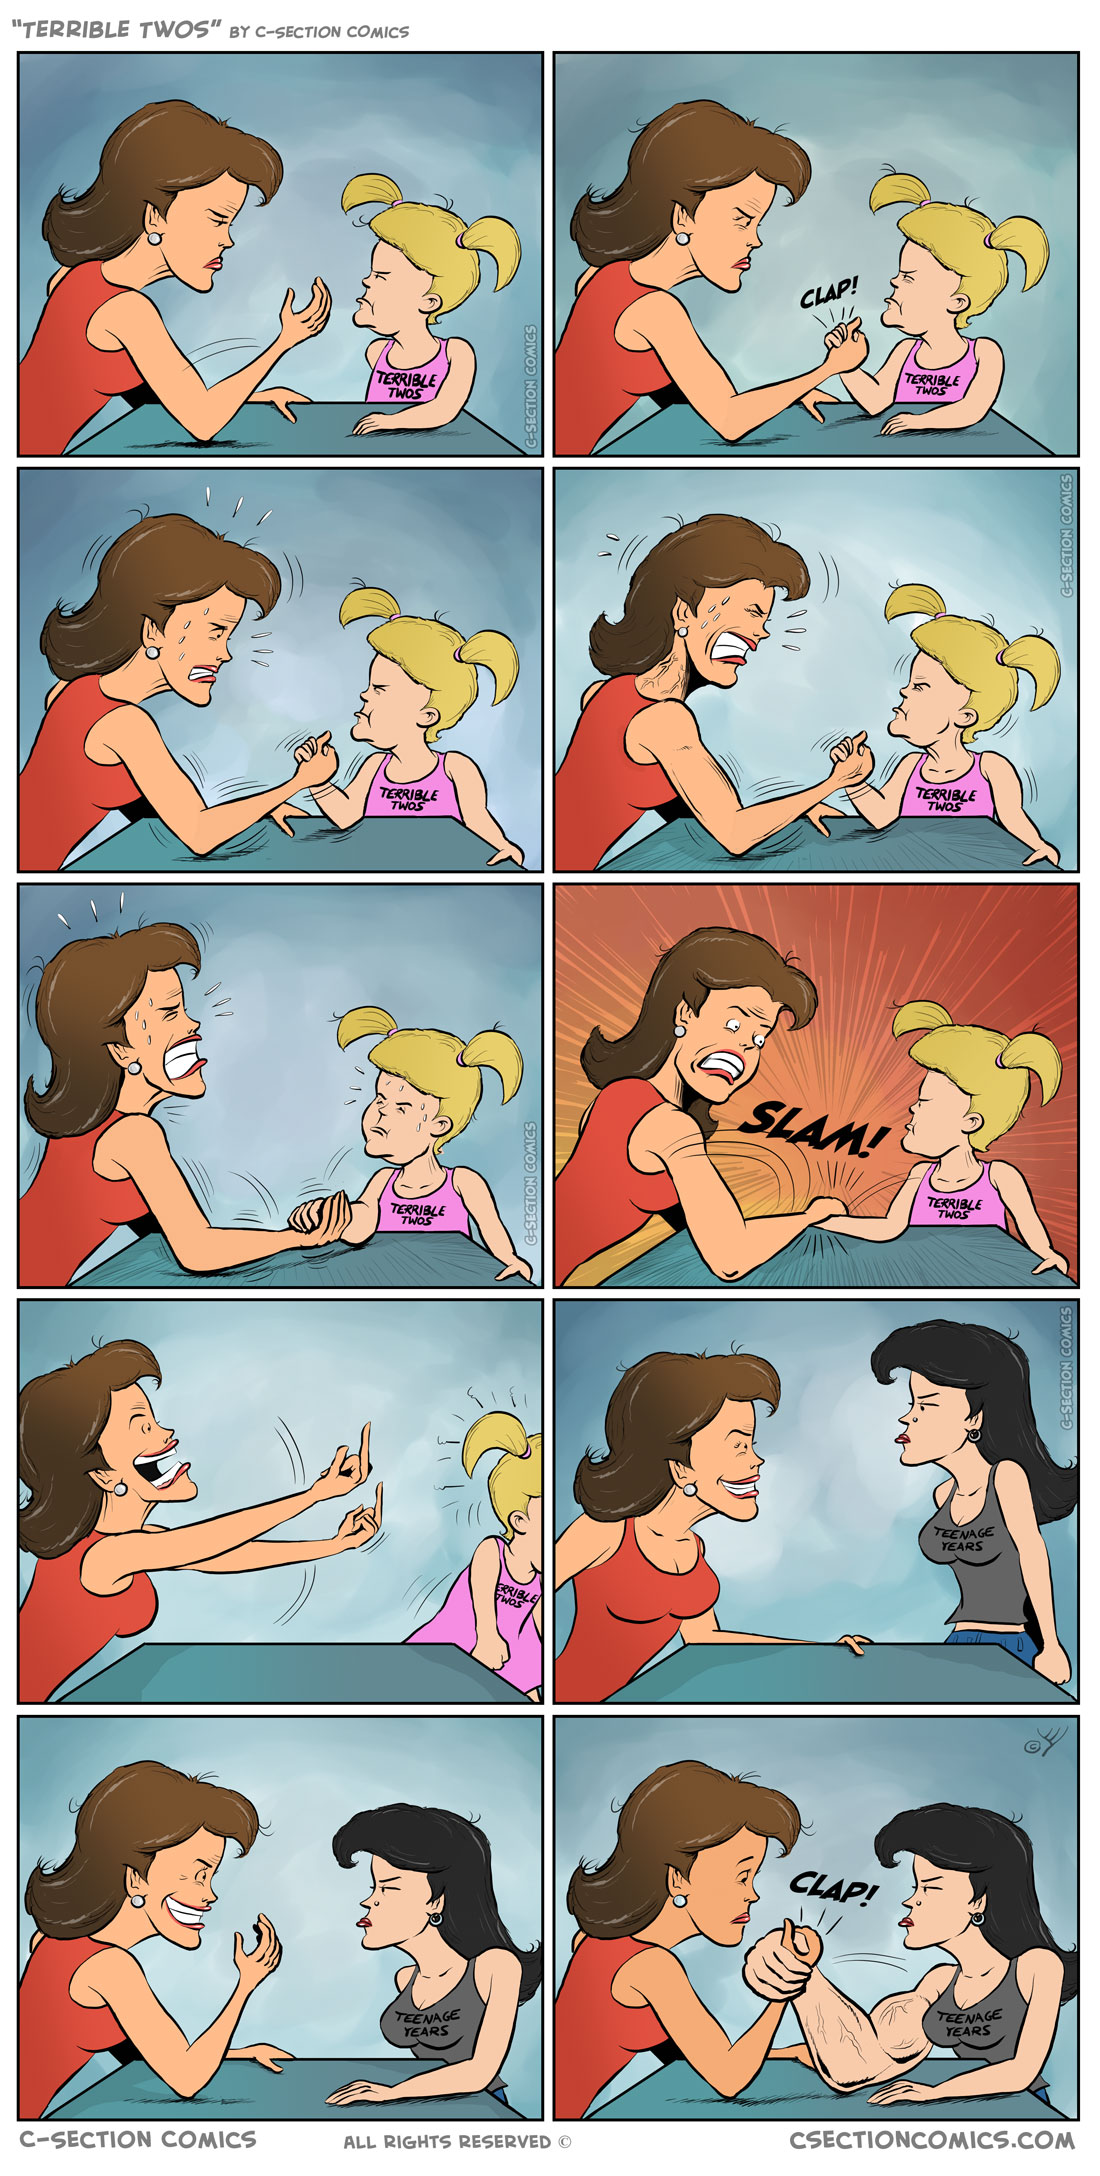 Terrible Twos vs Teenage Years - by C-Section Comics